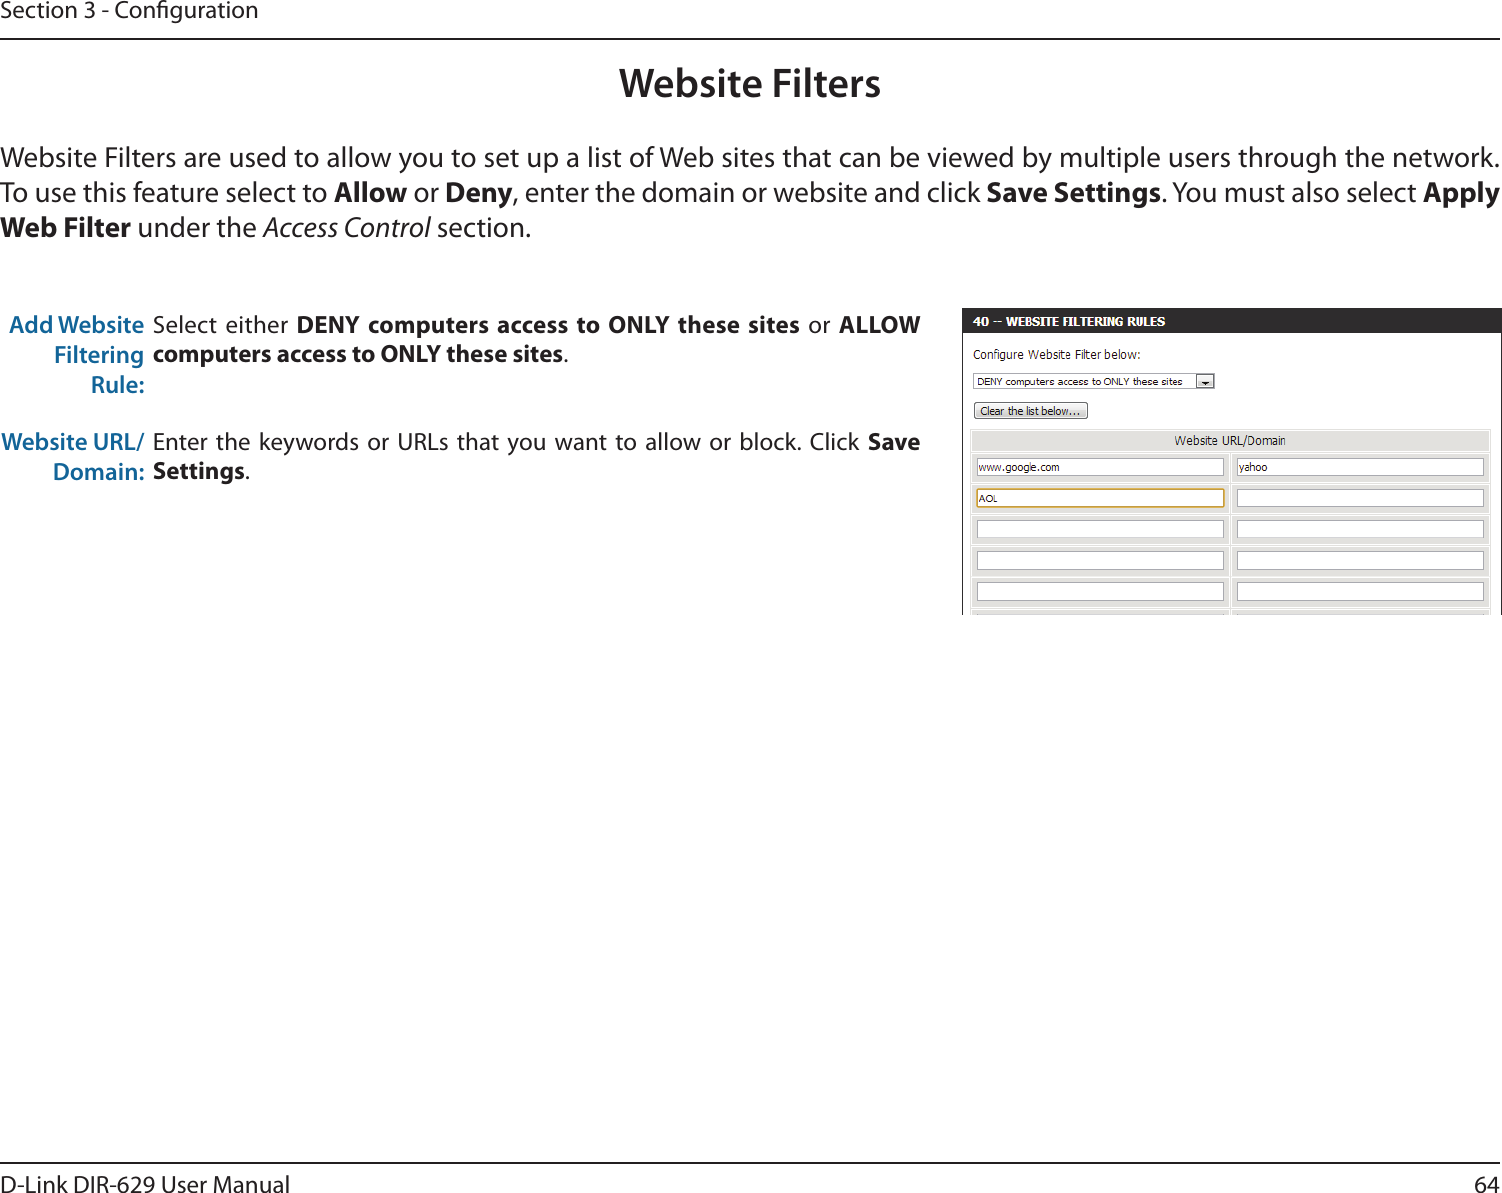 64D-Link DIR-629 User ManualSection 3 - CongurationWebsite FiltersWebsite Filters are used to allow you to set up a list of Web sites that can be viewed by multiple users through the network. To use this feature select to  or Deny, enter the domain or website and click Save Settings under the Access Control section.Add Website Filtering Rule:Select either DENY computers access to ONLY these sites or computers access to ONLY these sites.Website URL/Domain:Save Settings.